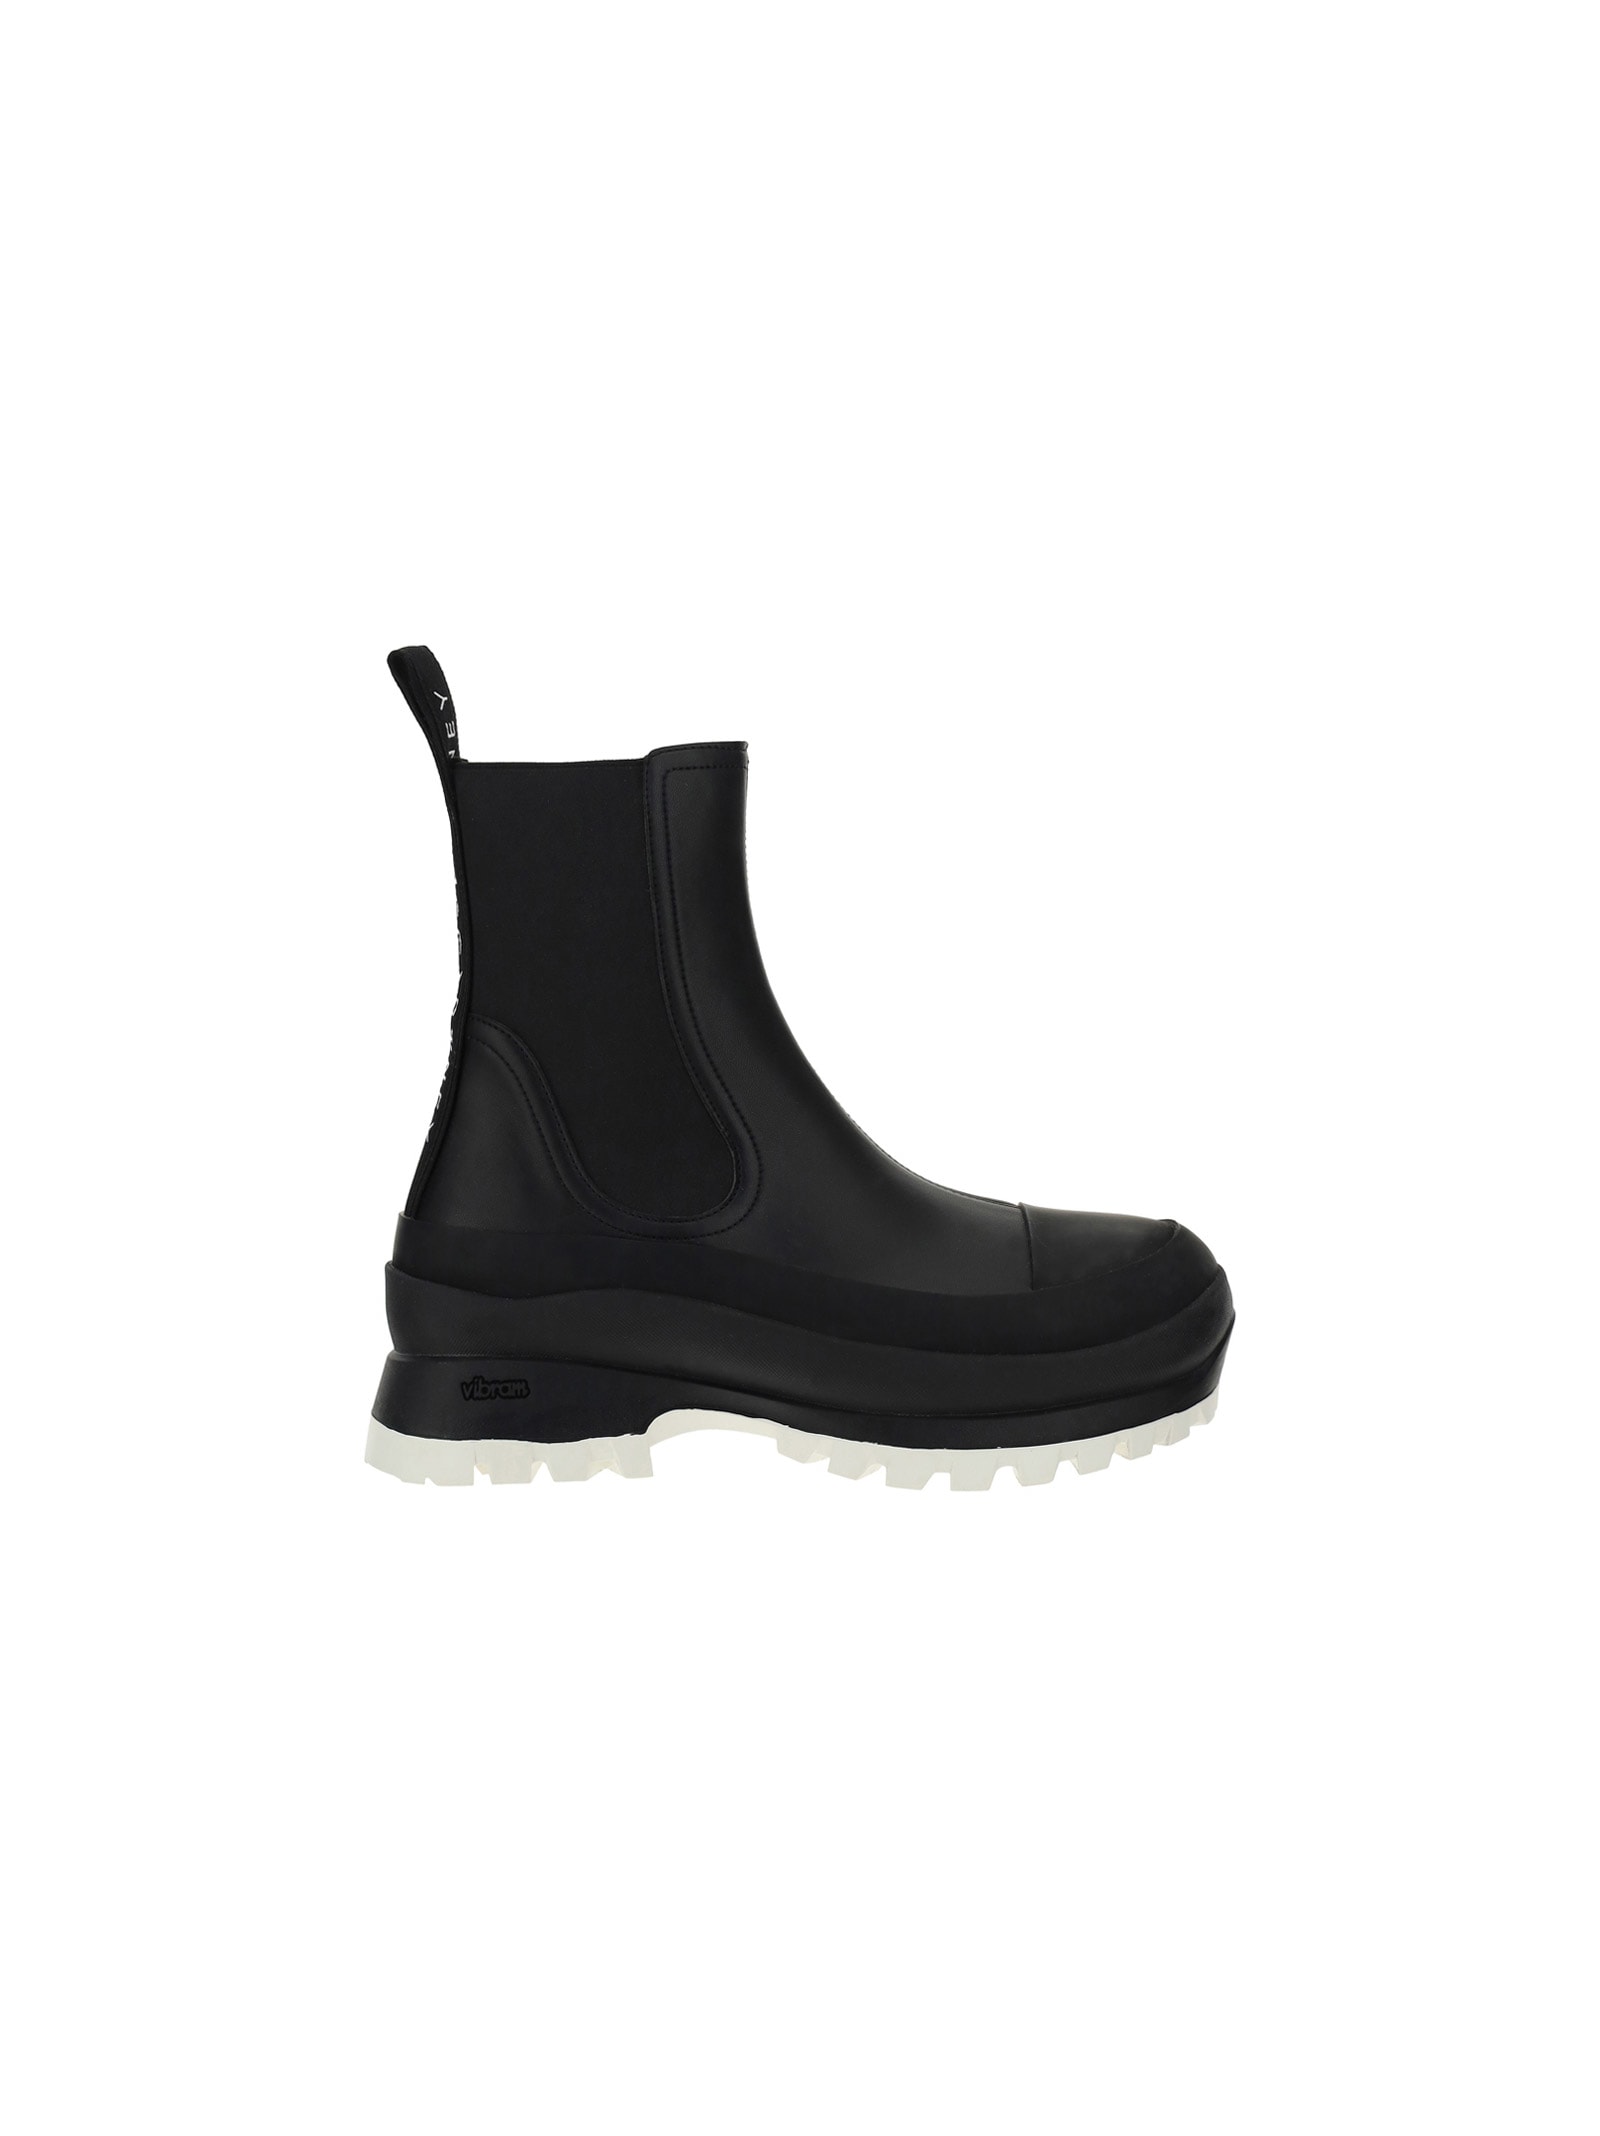 Buy Stella Mccartney Ankle Boots online, shop Stella McCartney shoes with free shipping